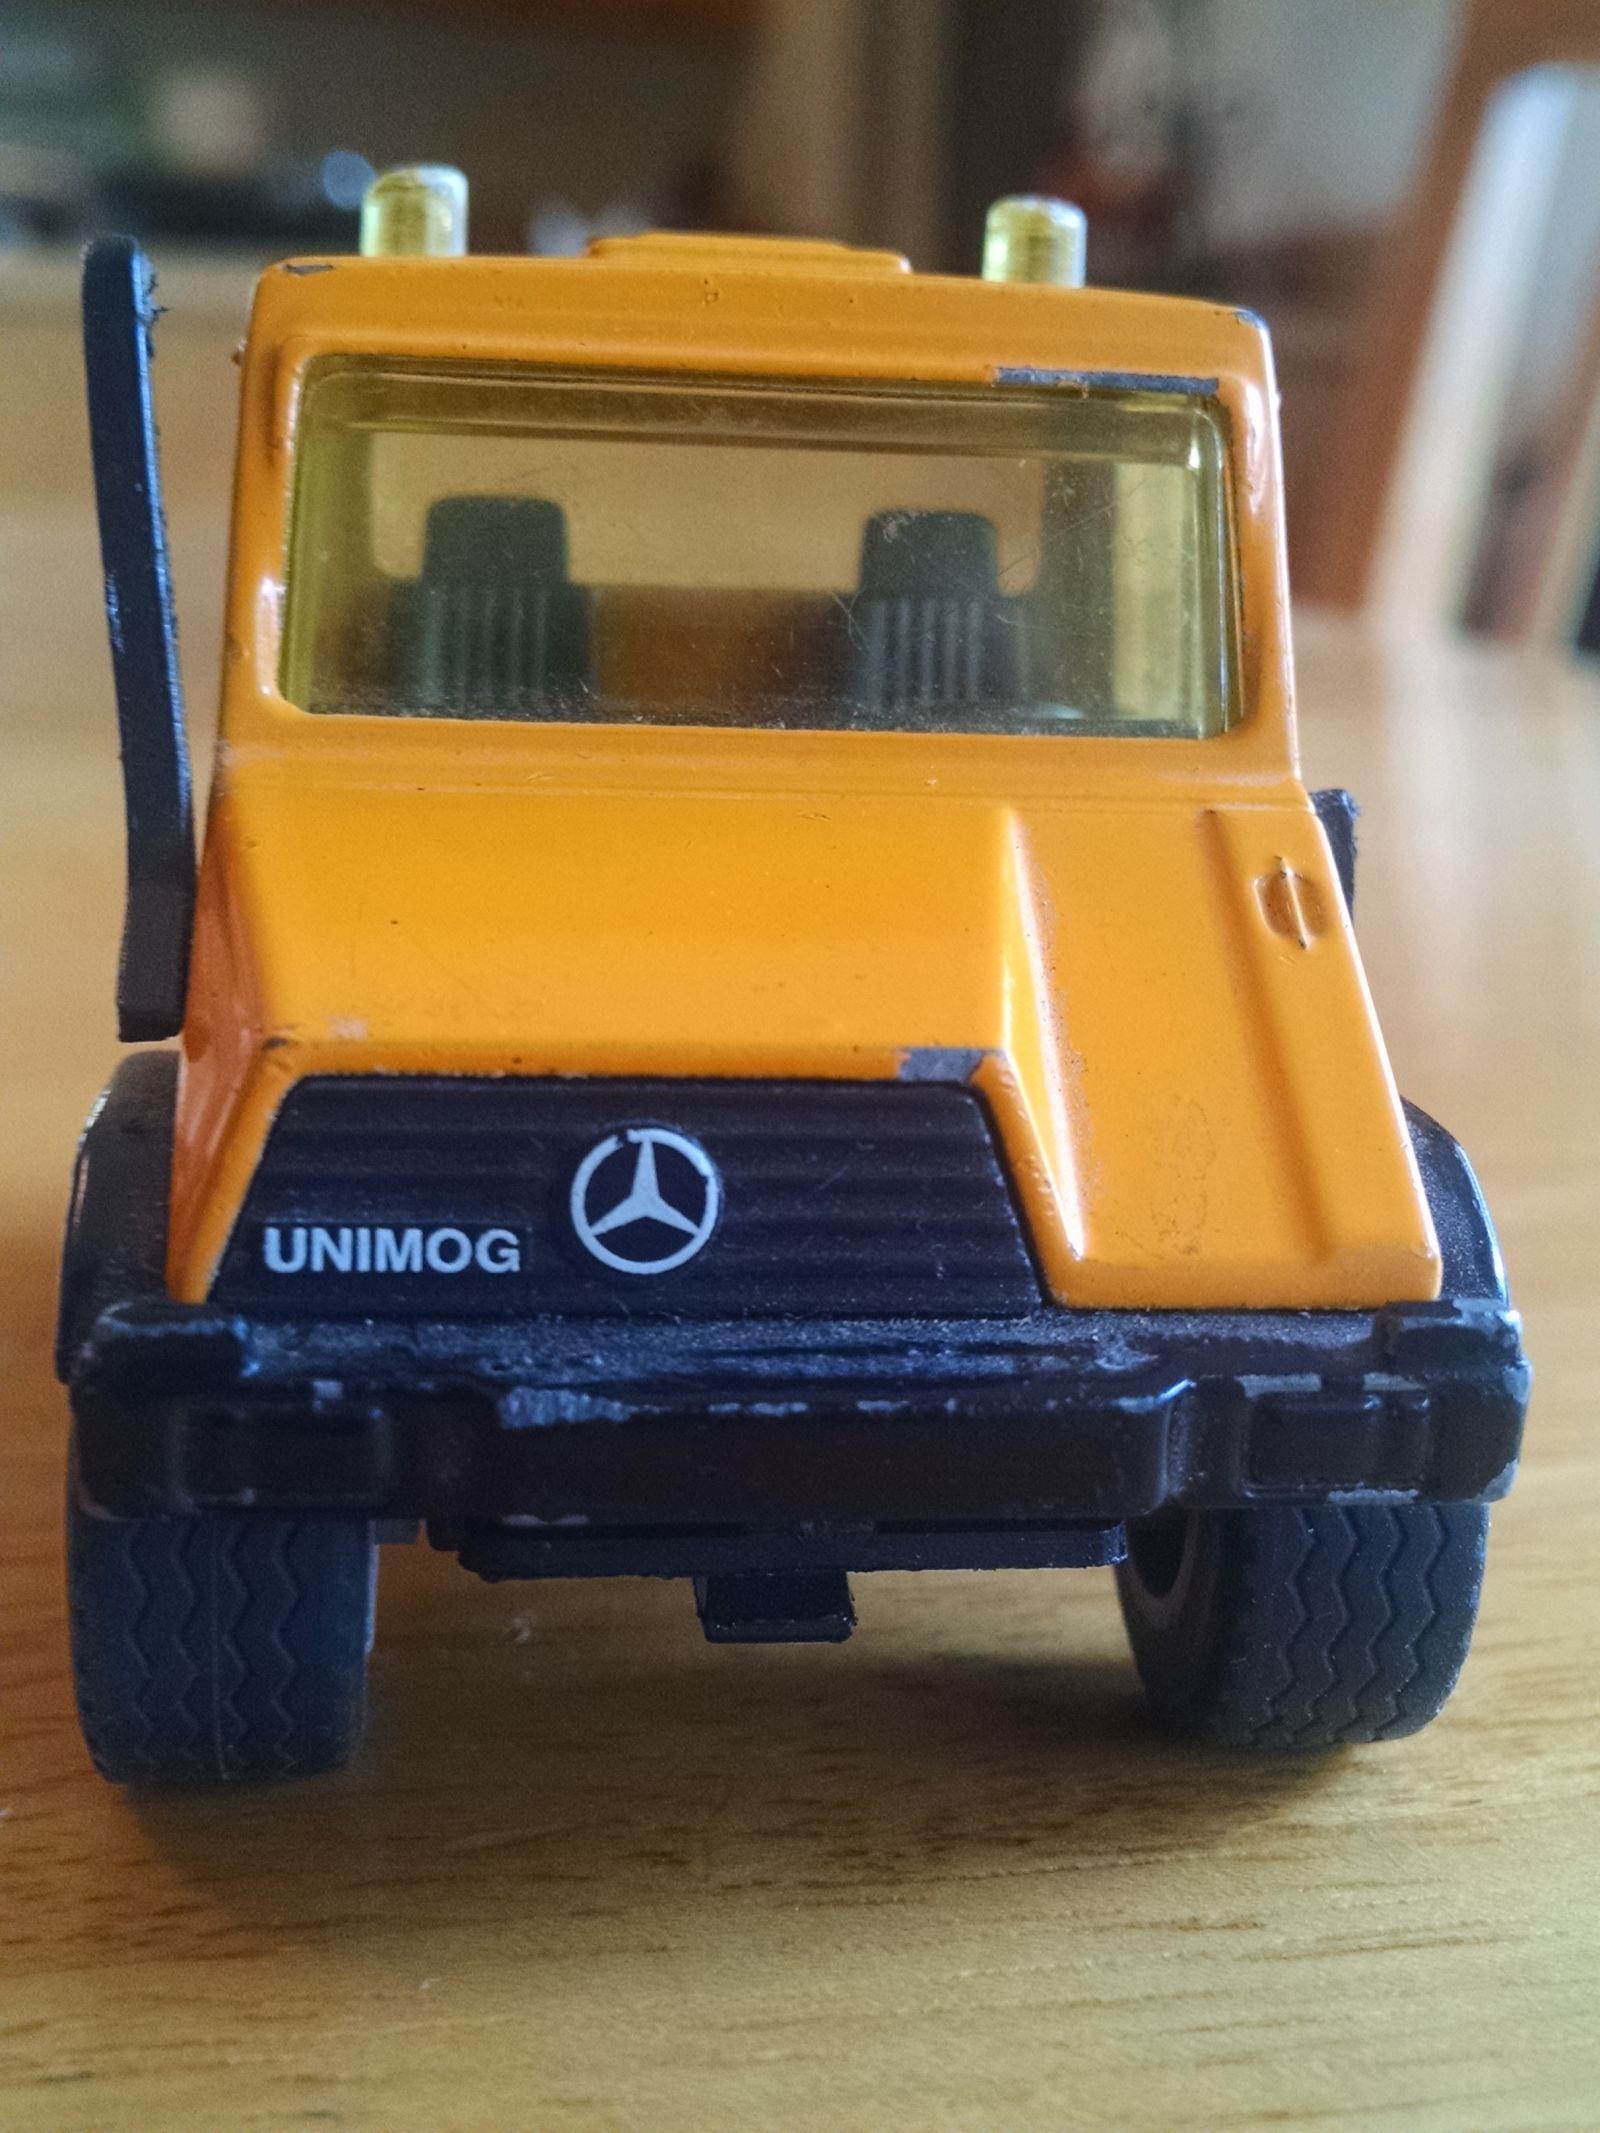 Illustration for article titled Unexpected find: Unimog